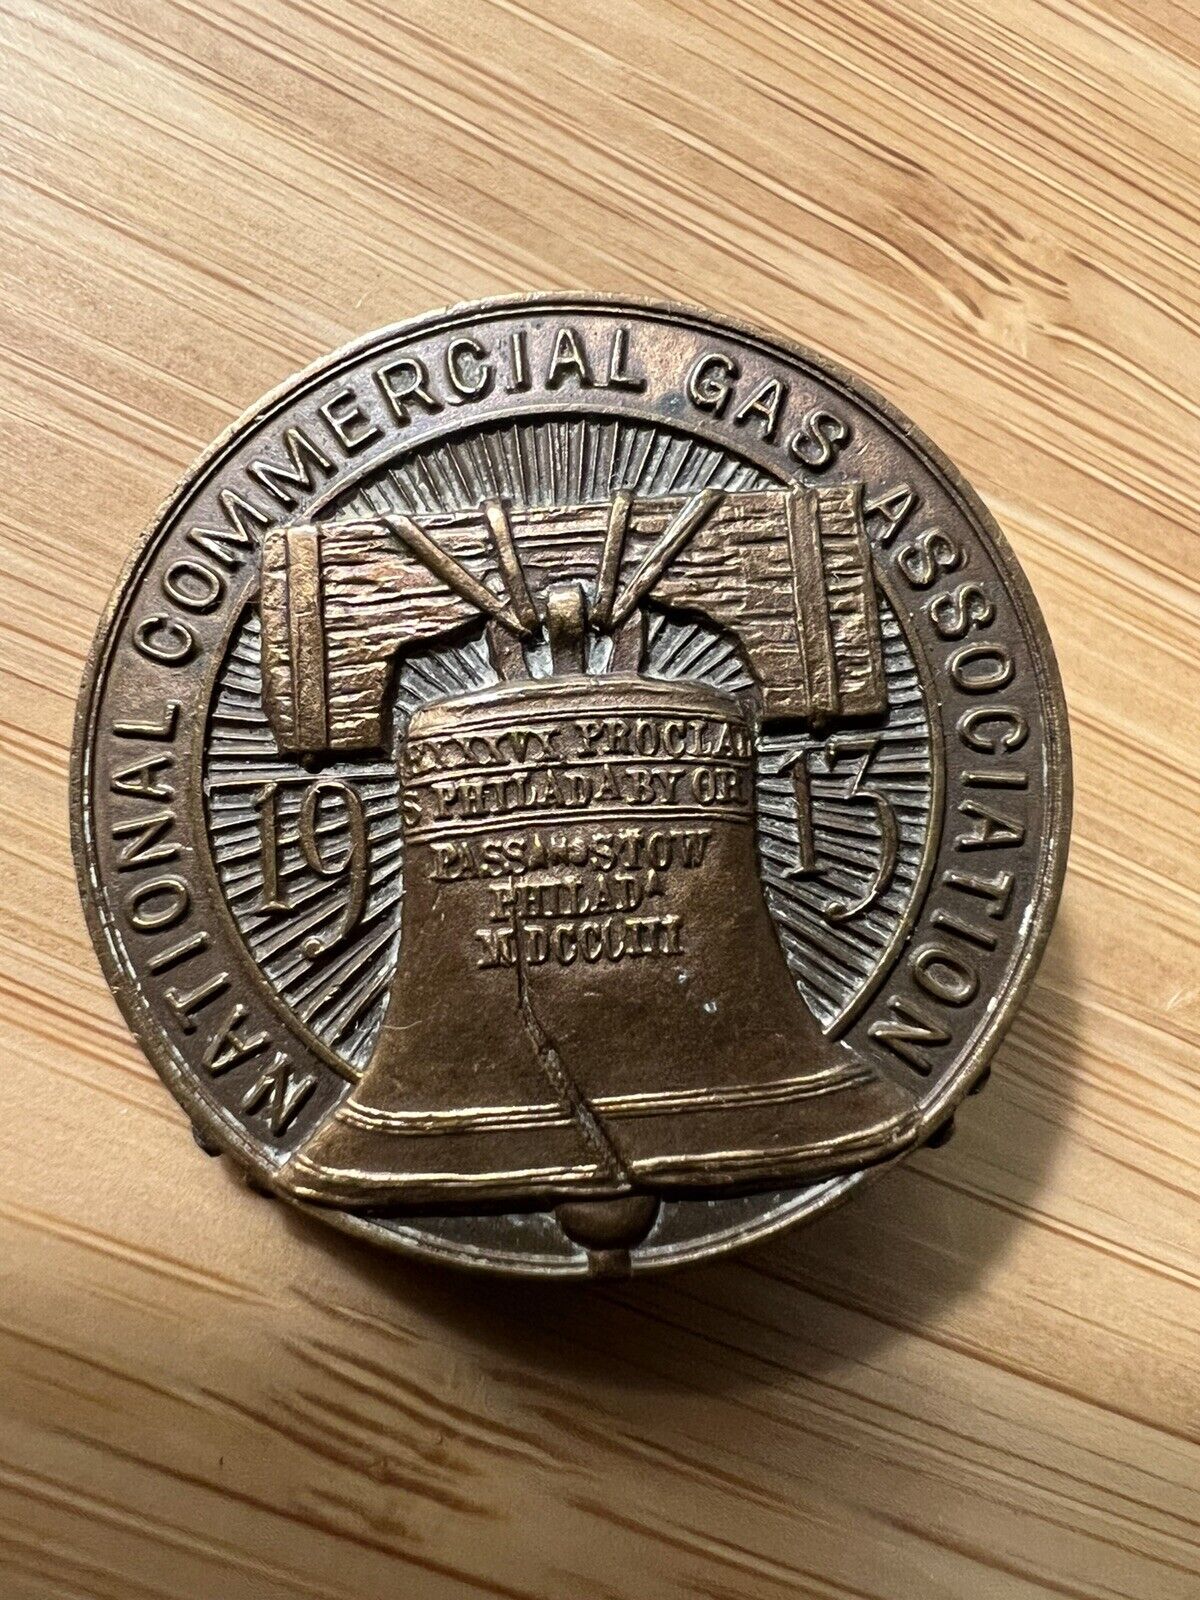 1913 NATIONAL COMMERICAL GAS ASSOCIATION THICK METAL PINBACK BUTTON K366